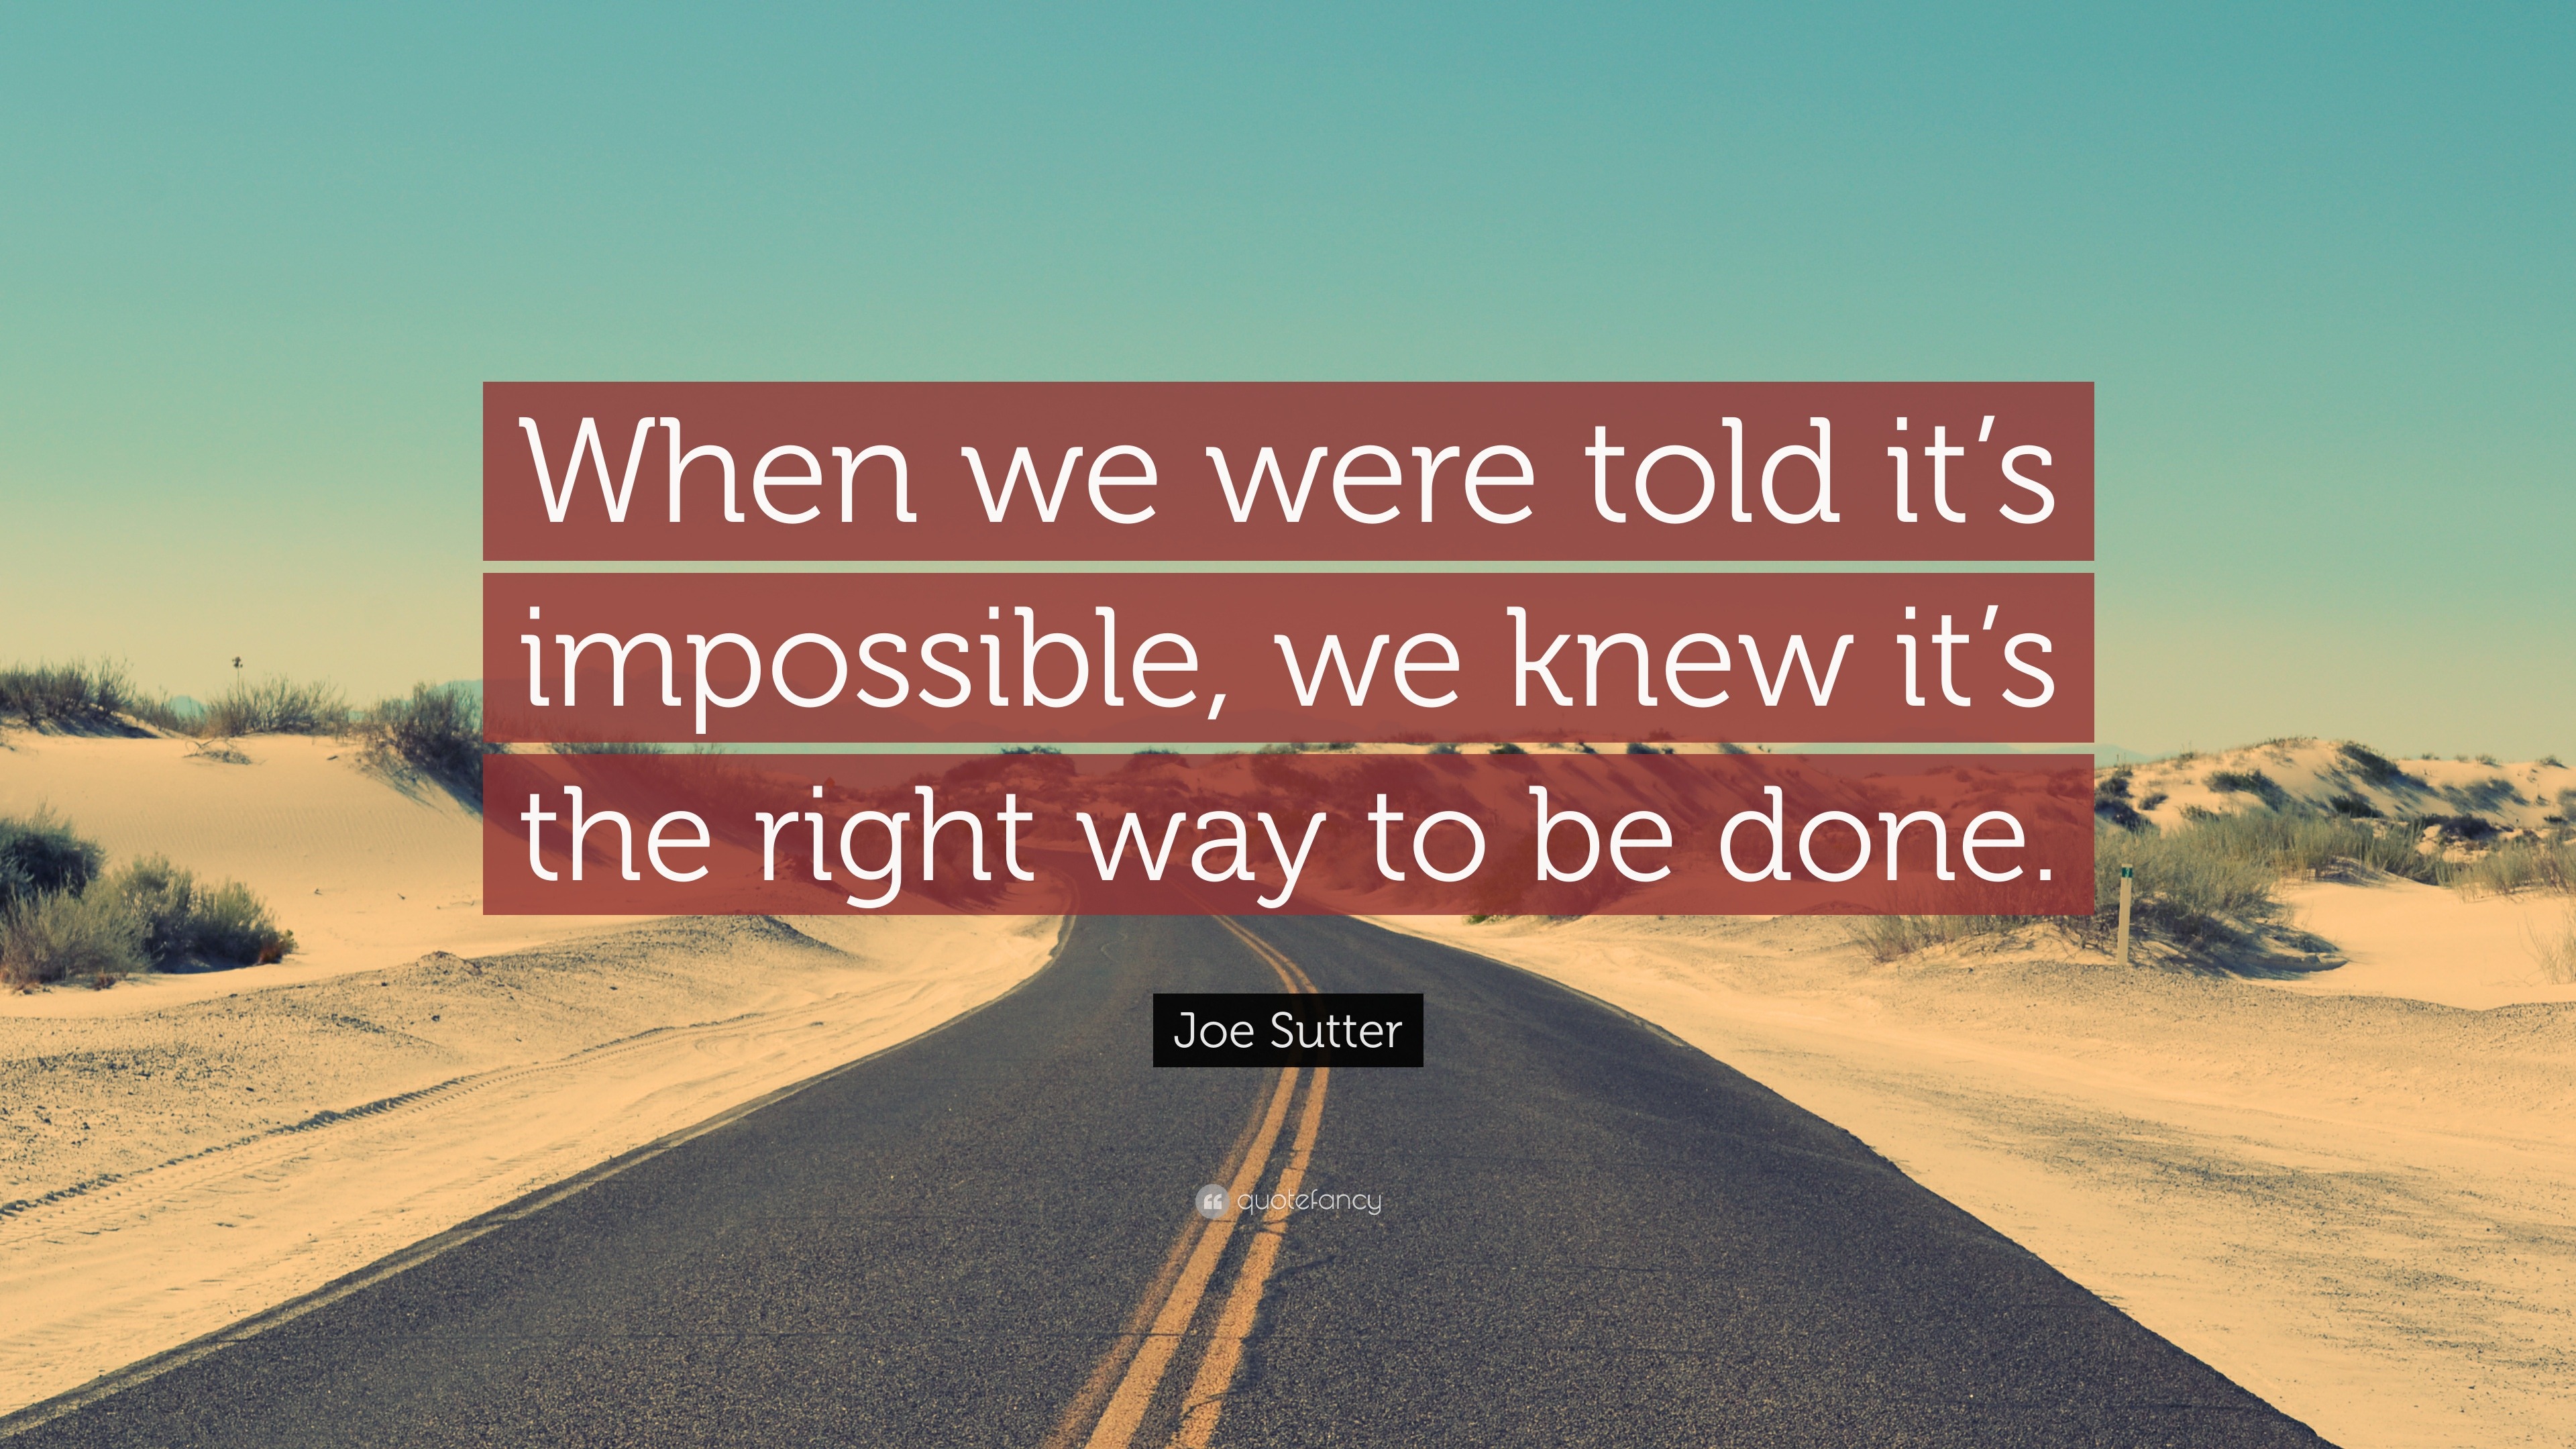 Joe Sutter Quote: “When we were told it's impossible, we knew it's the right  way to